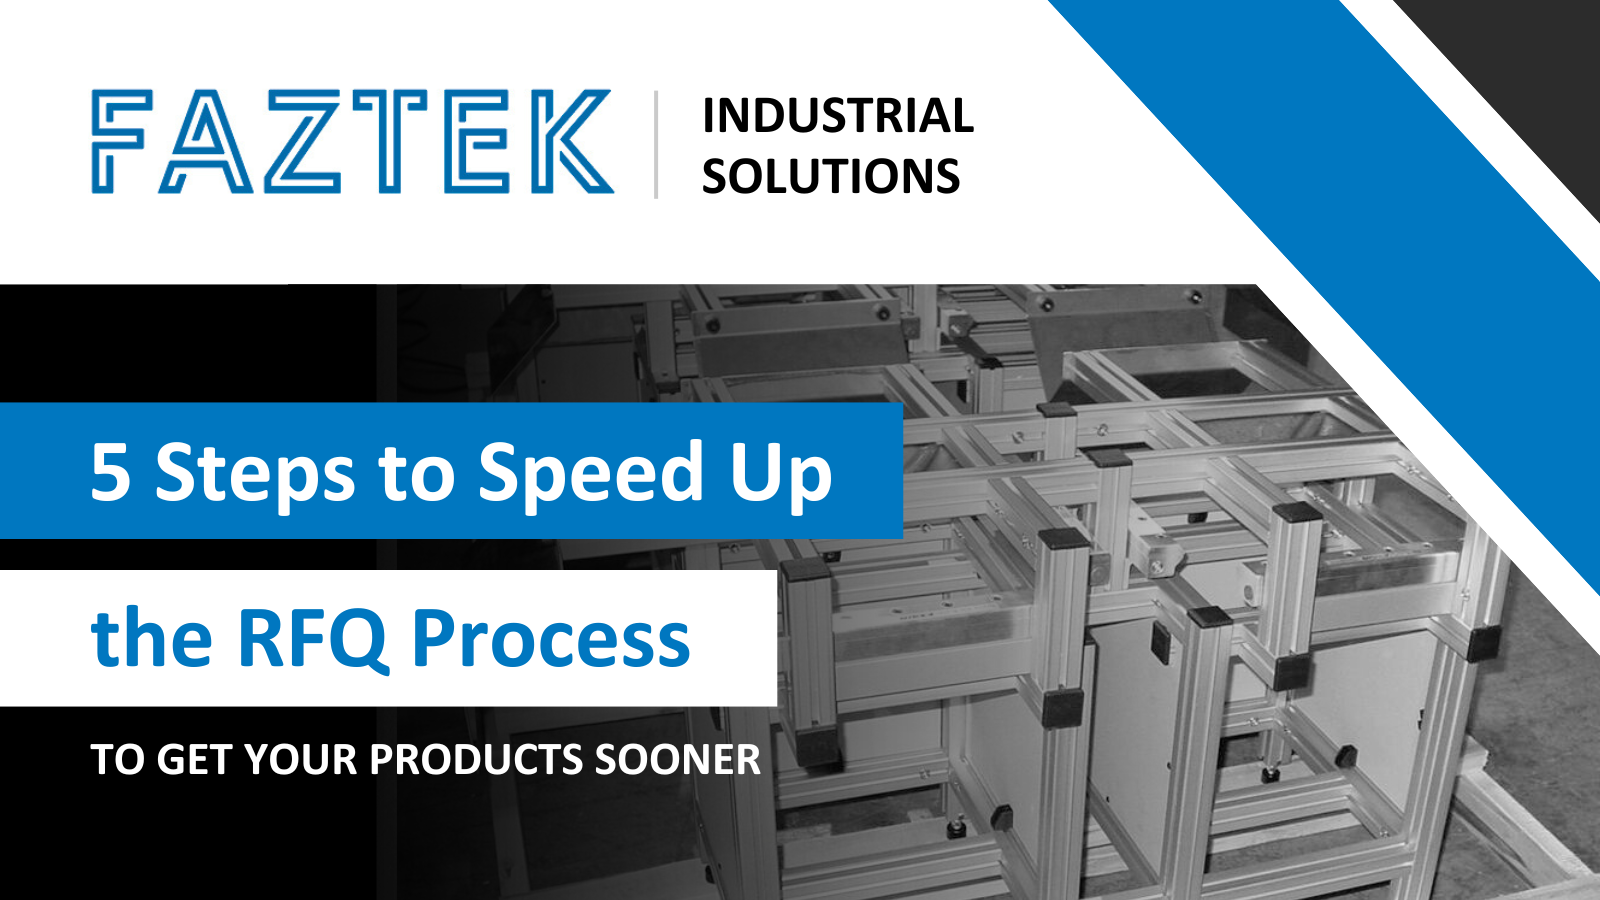 5 Steps to Speed Up the RFQ Process to Get Your Products Sooner